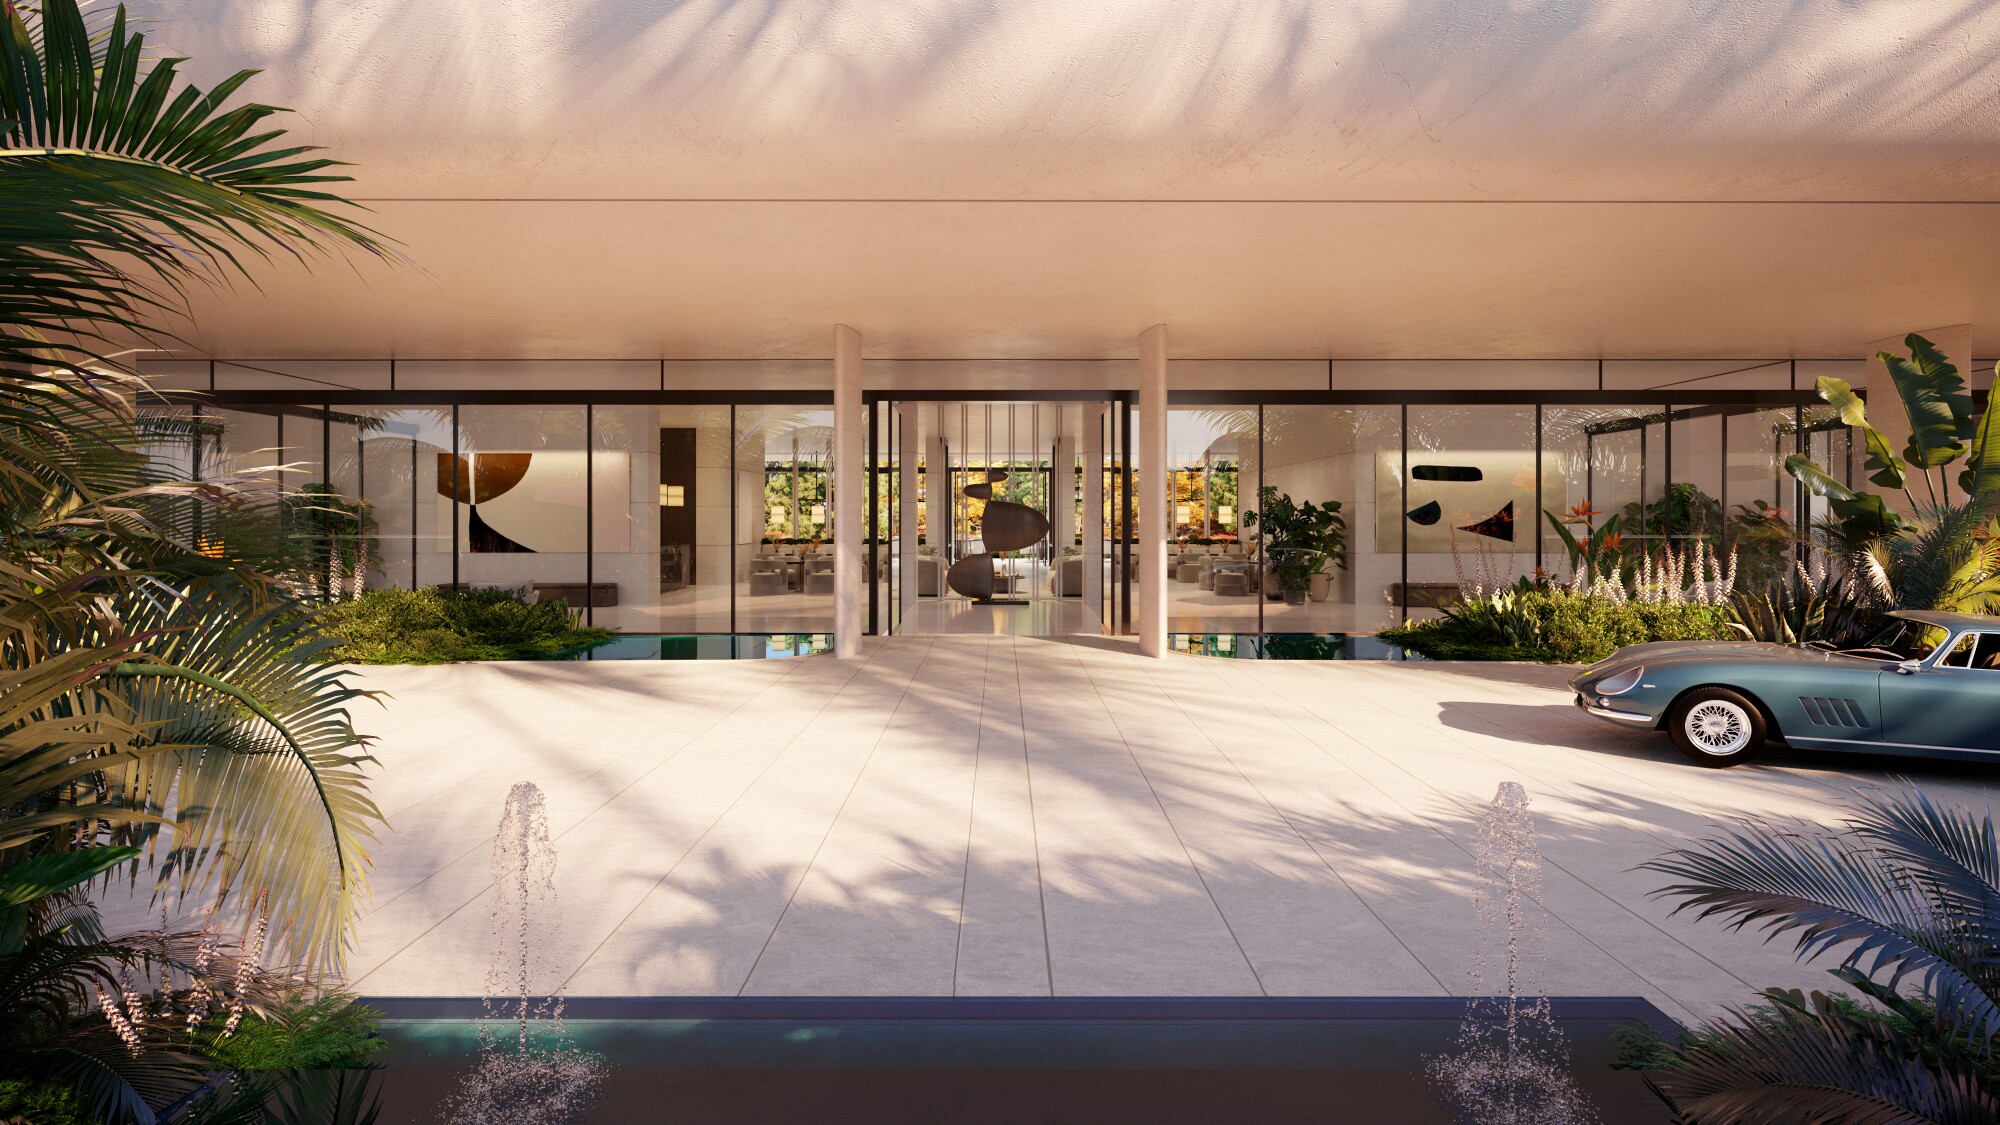 View of the entrance to the Aman Hotel in One Beverly Hills, which will have 42 suites.